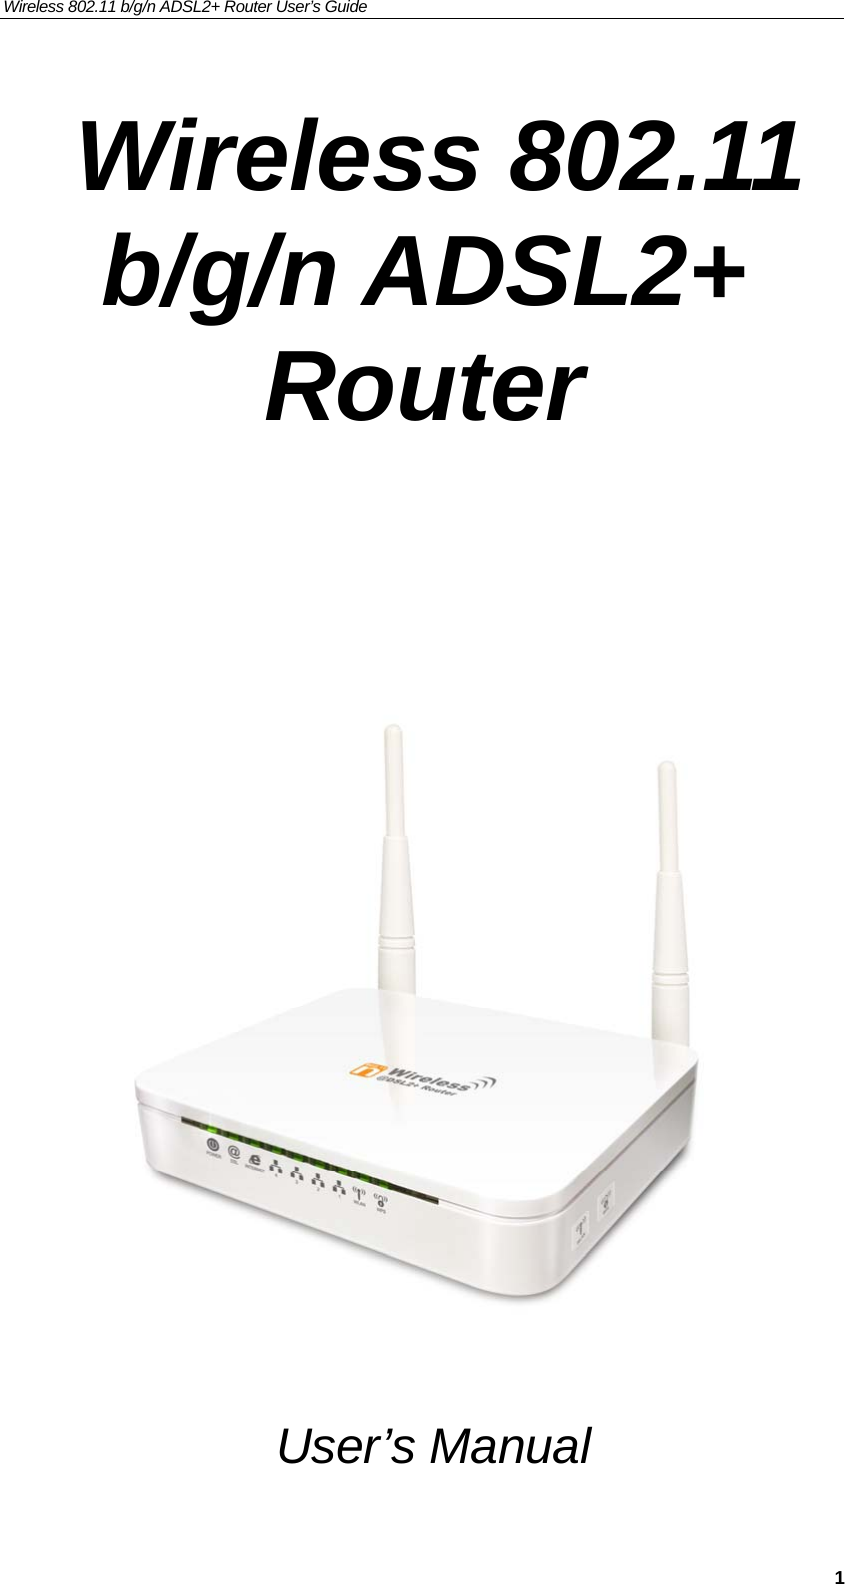 Wireless 802.11 b/g/n ADSL2+ Router User’s Guide     Wireless 802.11 b/g/n ADSL2+ Router            User’s Manual  1